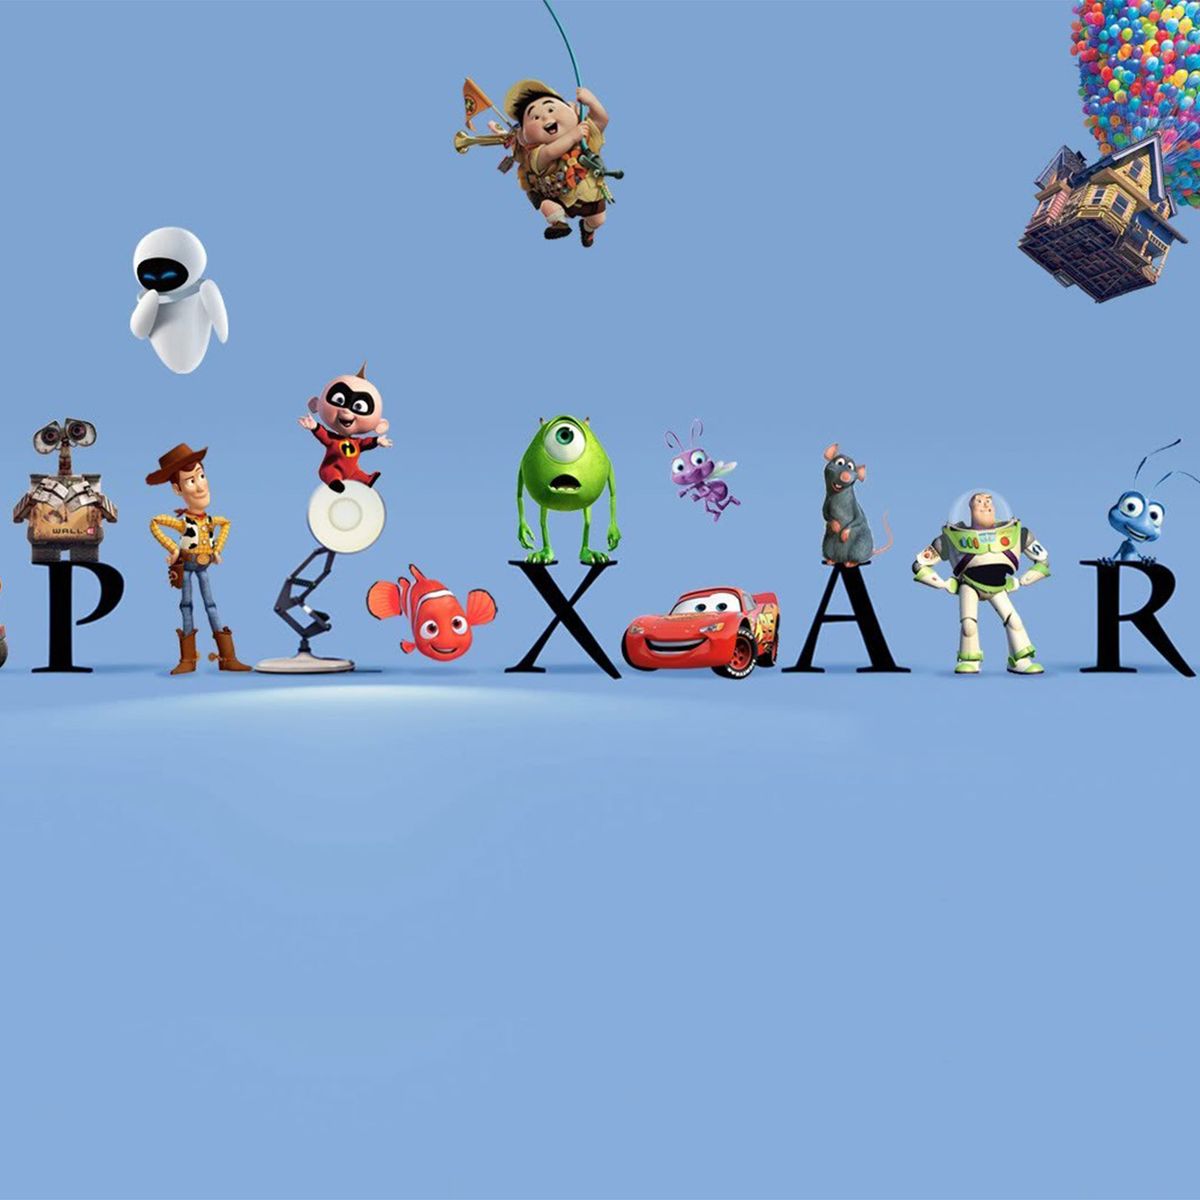 Pixar announces new film for 2023 with plot details, release date